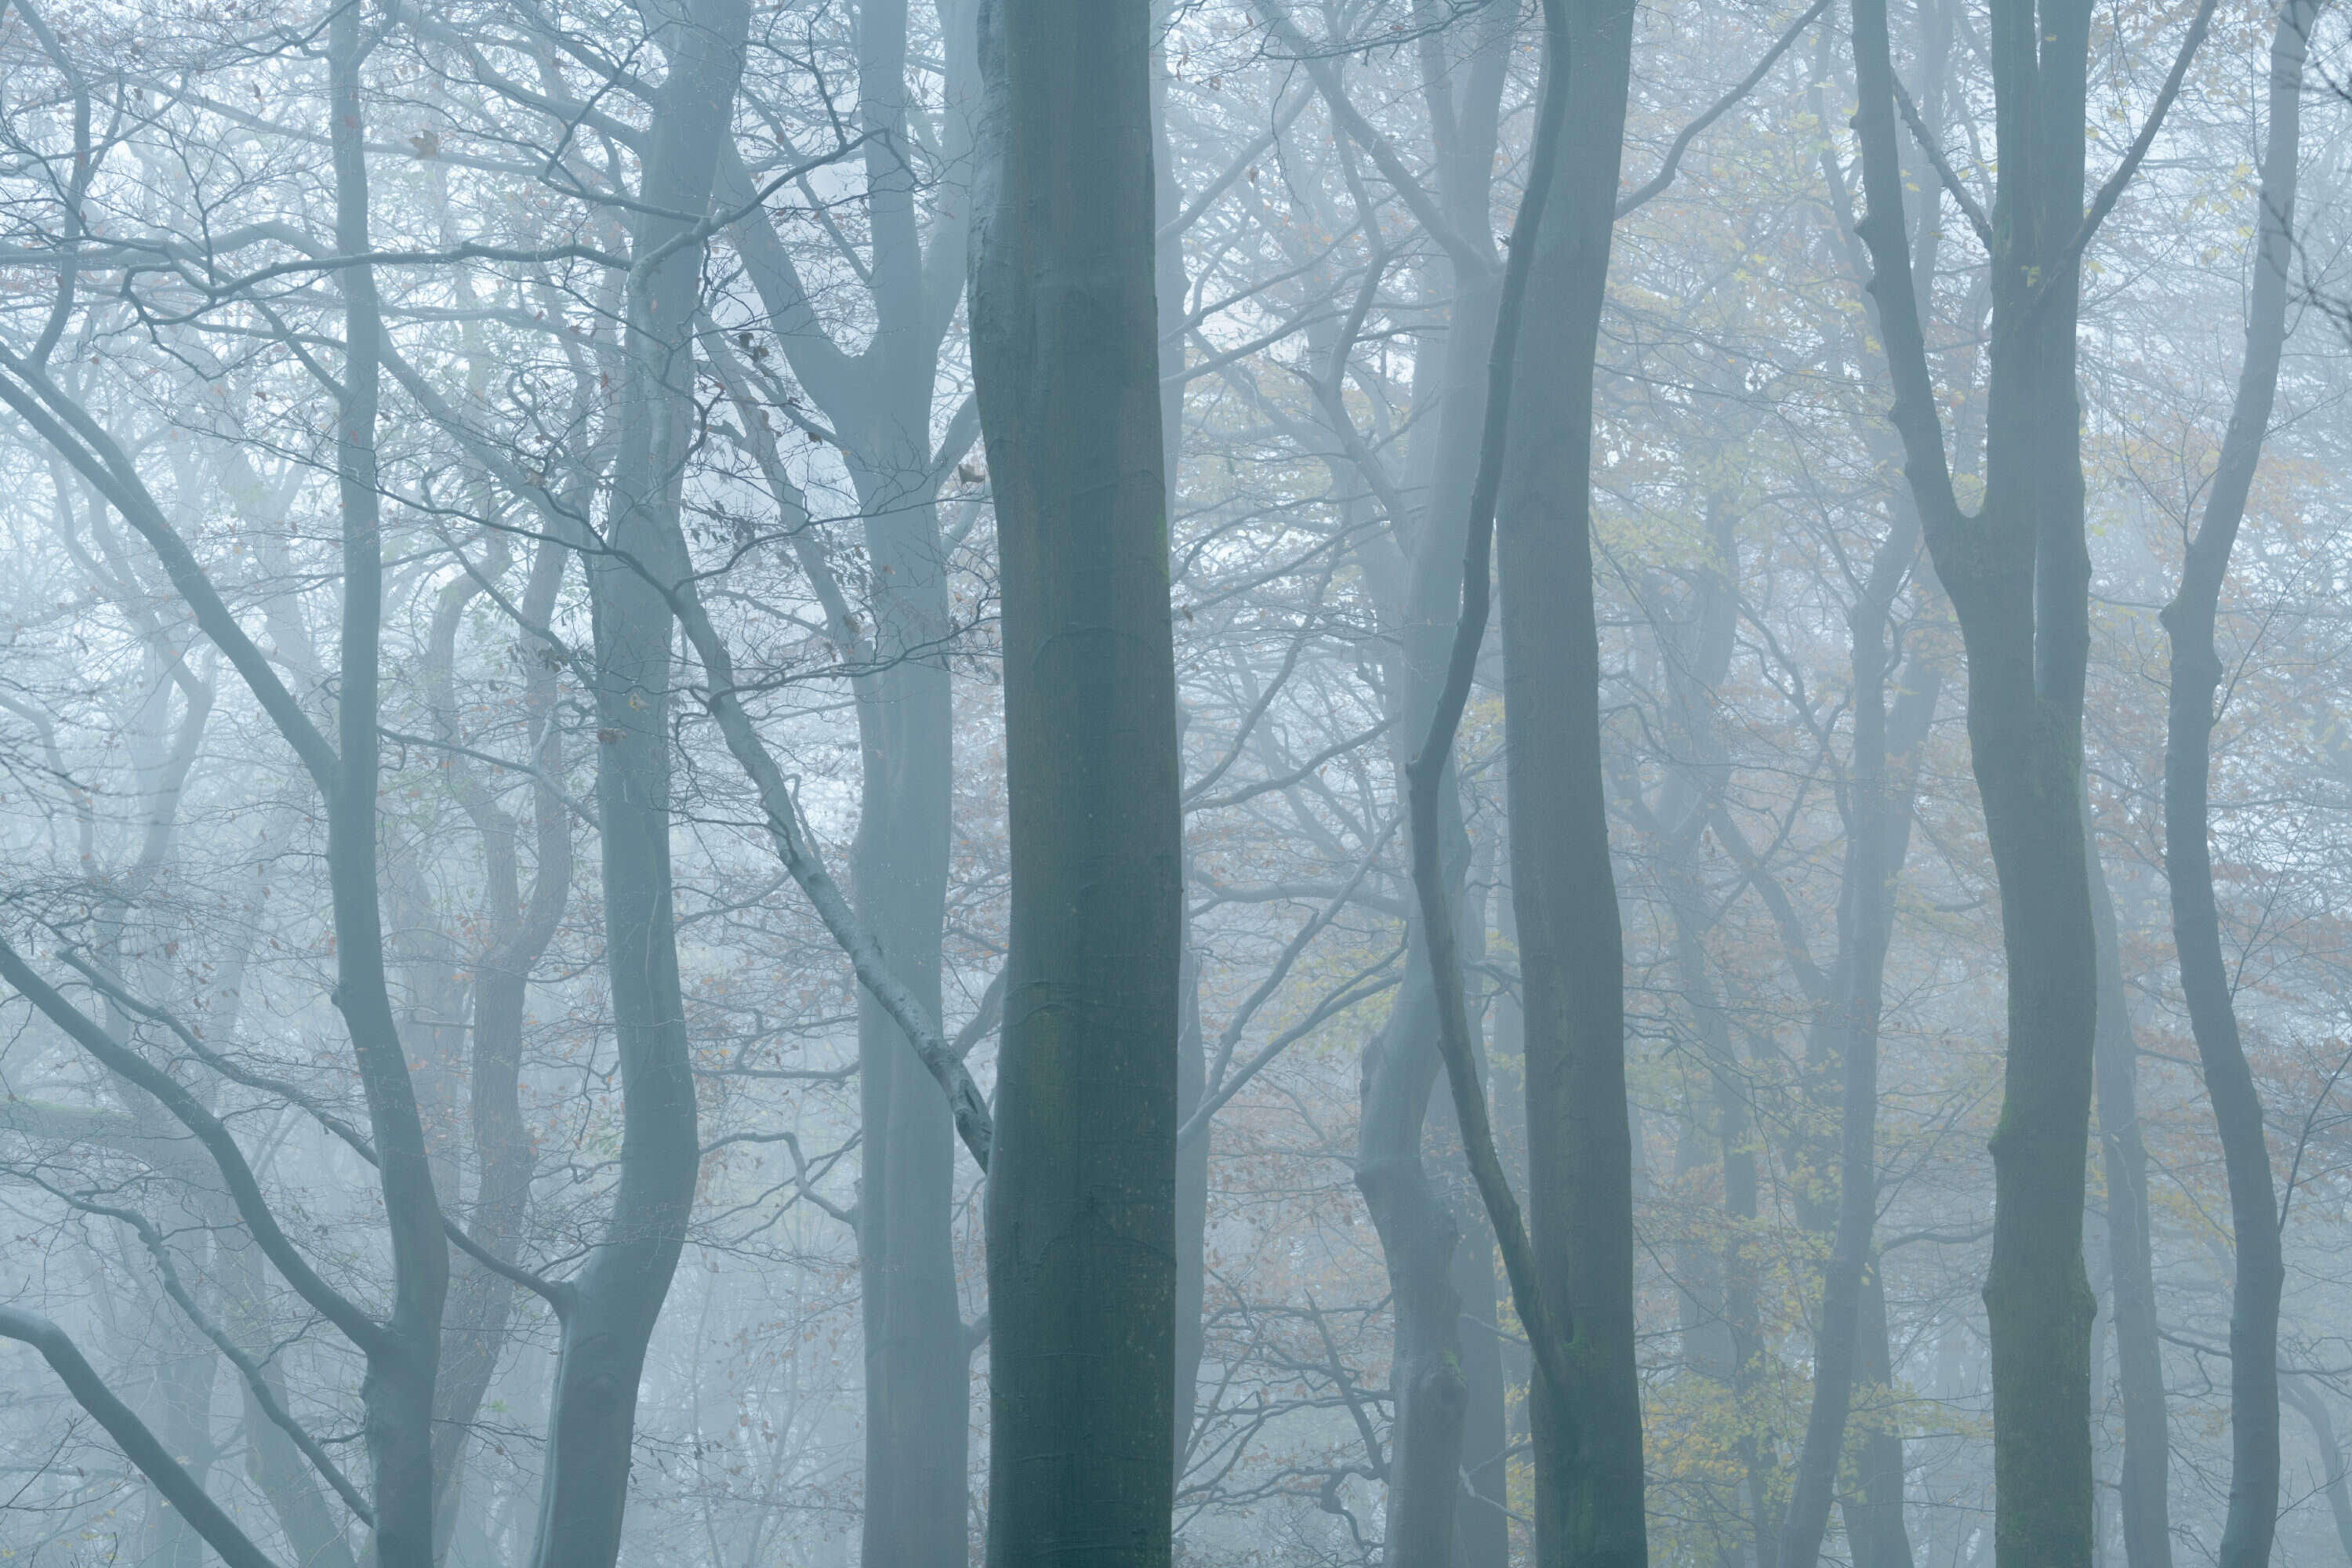 Trees in Mist by Paul Gallagher aspect2i